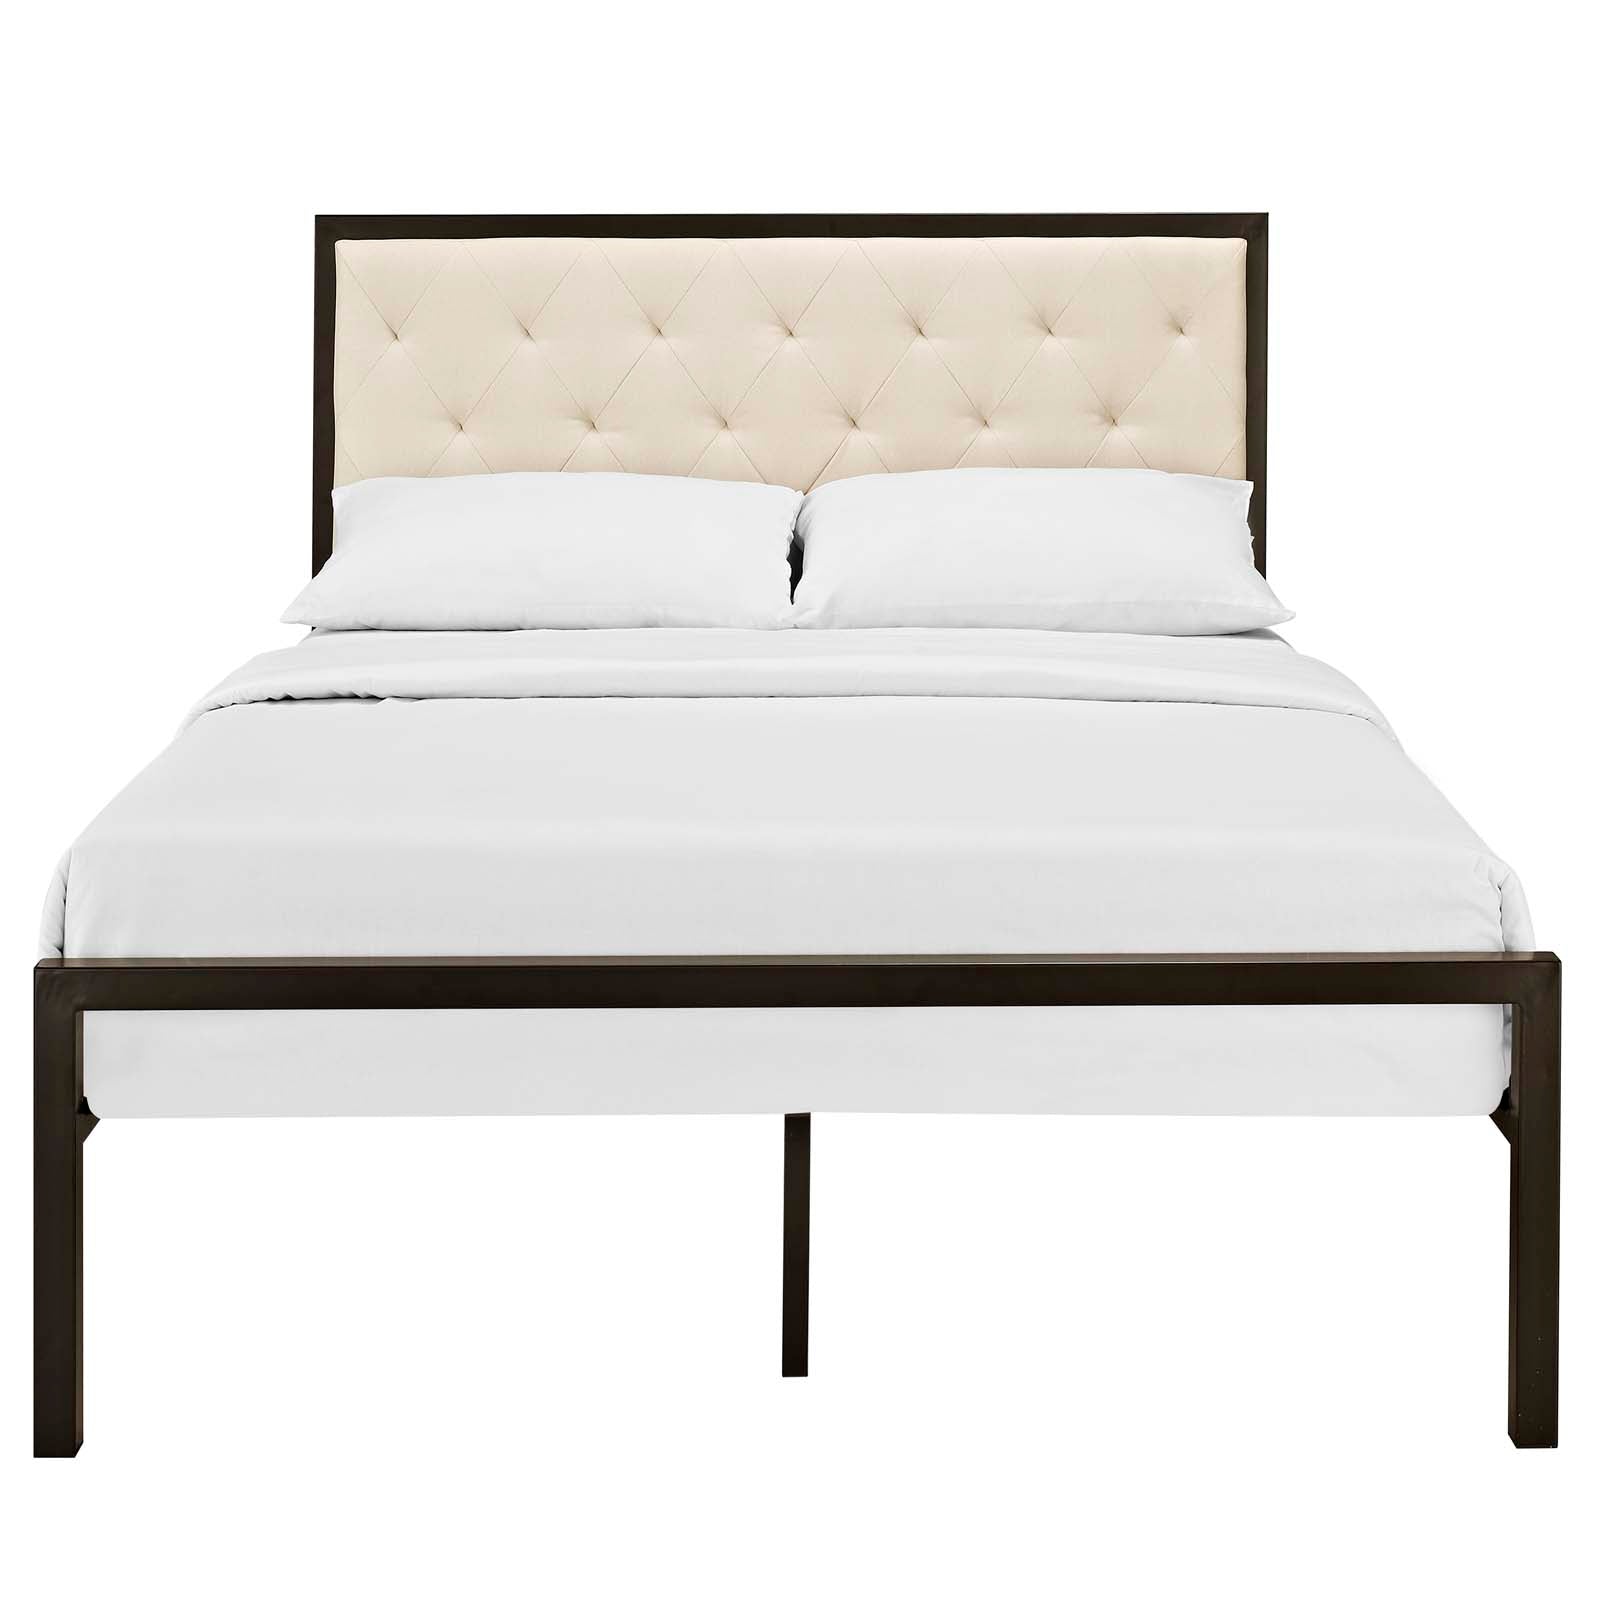 Modway Beds - Mia Full Fabric Bed Brown Beige